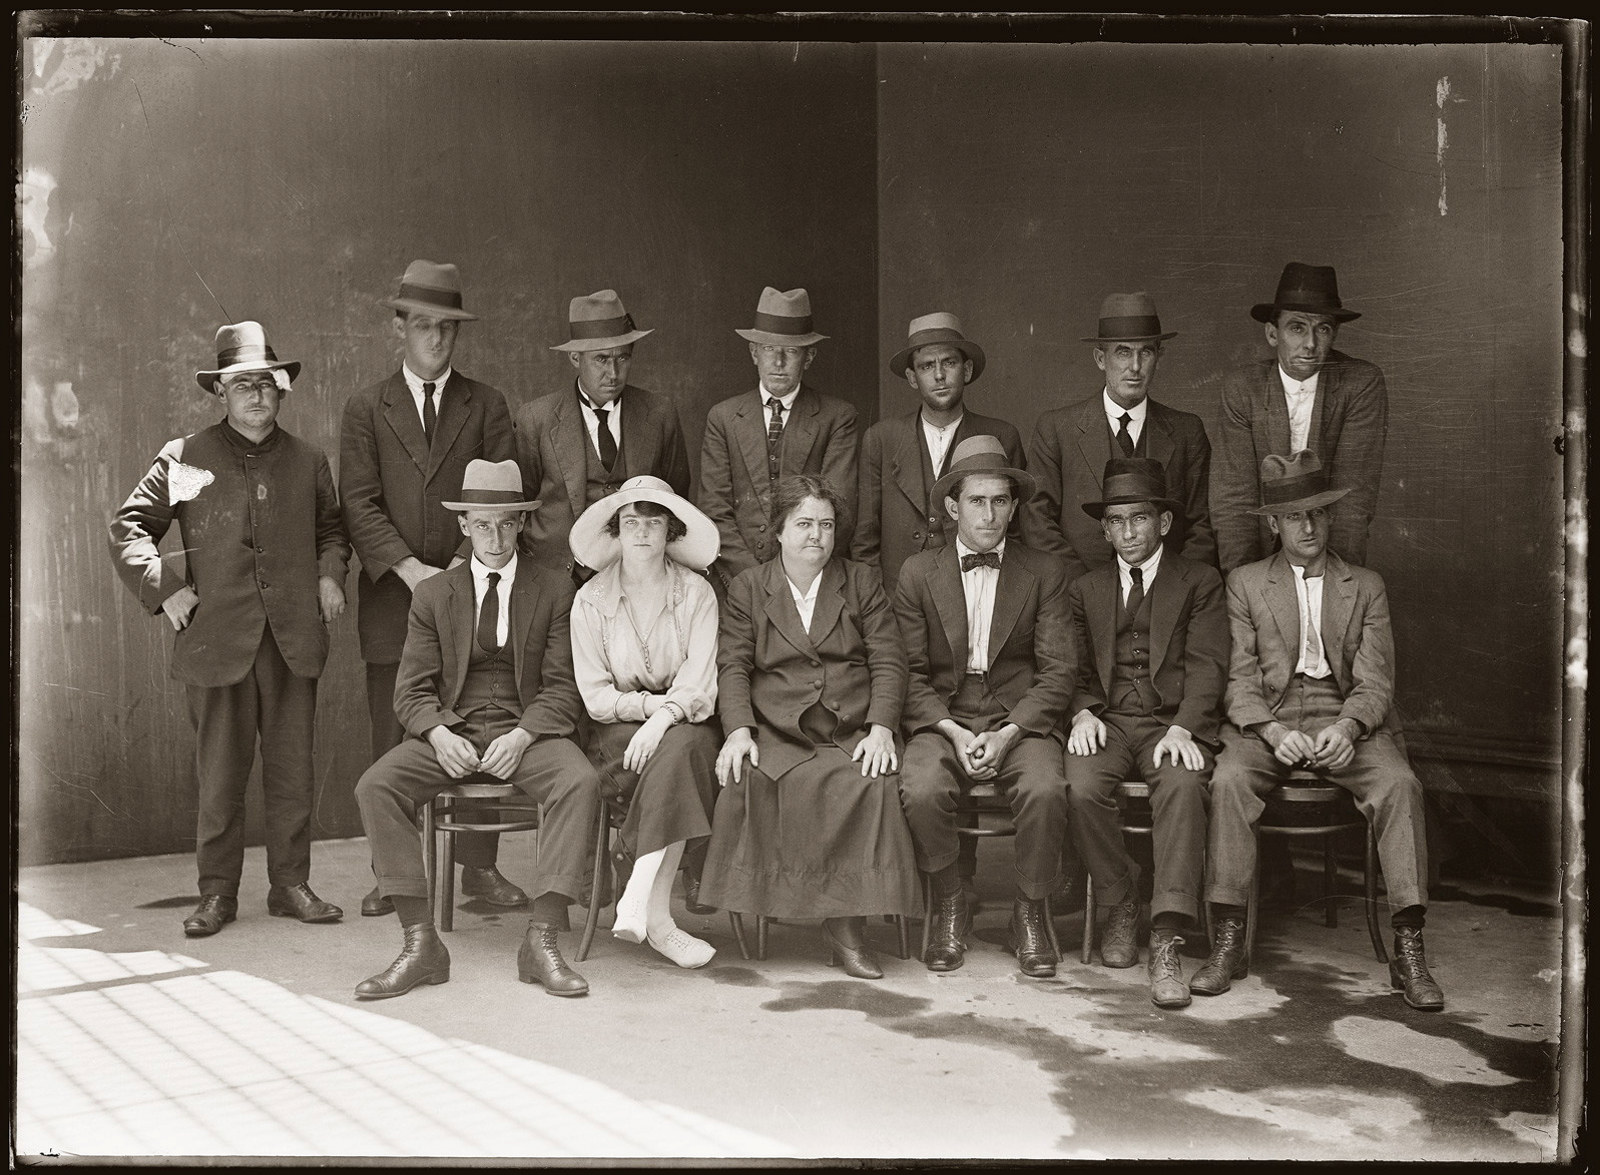 Special Photograph of group of police suspects, circa 25 January 1921, Central Police Station, Sydney